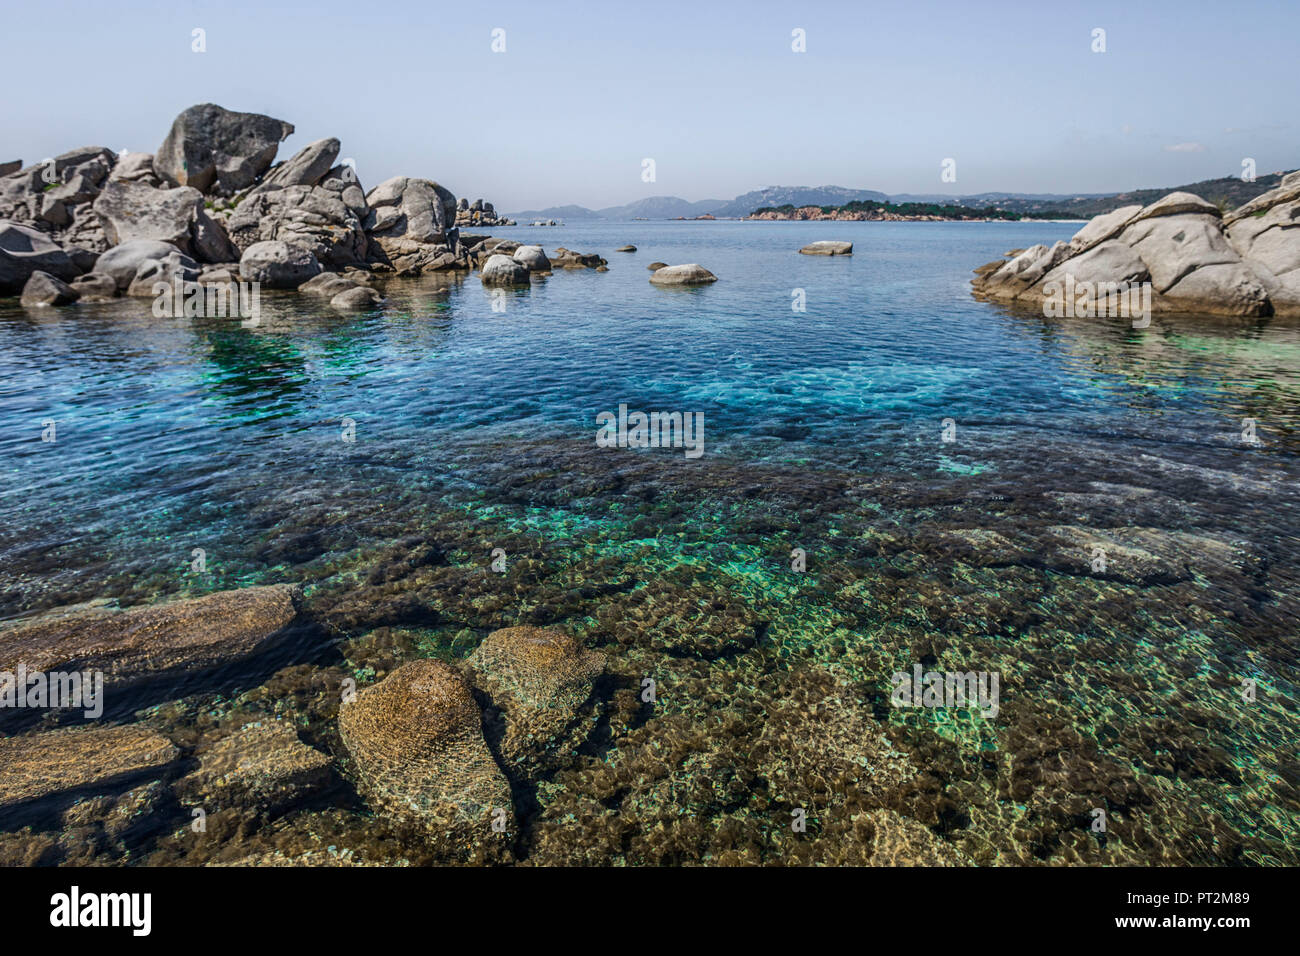 View of the coast of Palombaggia Corsica with deep blue water Stock Photo